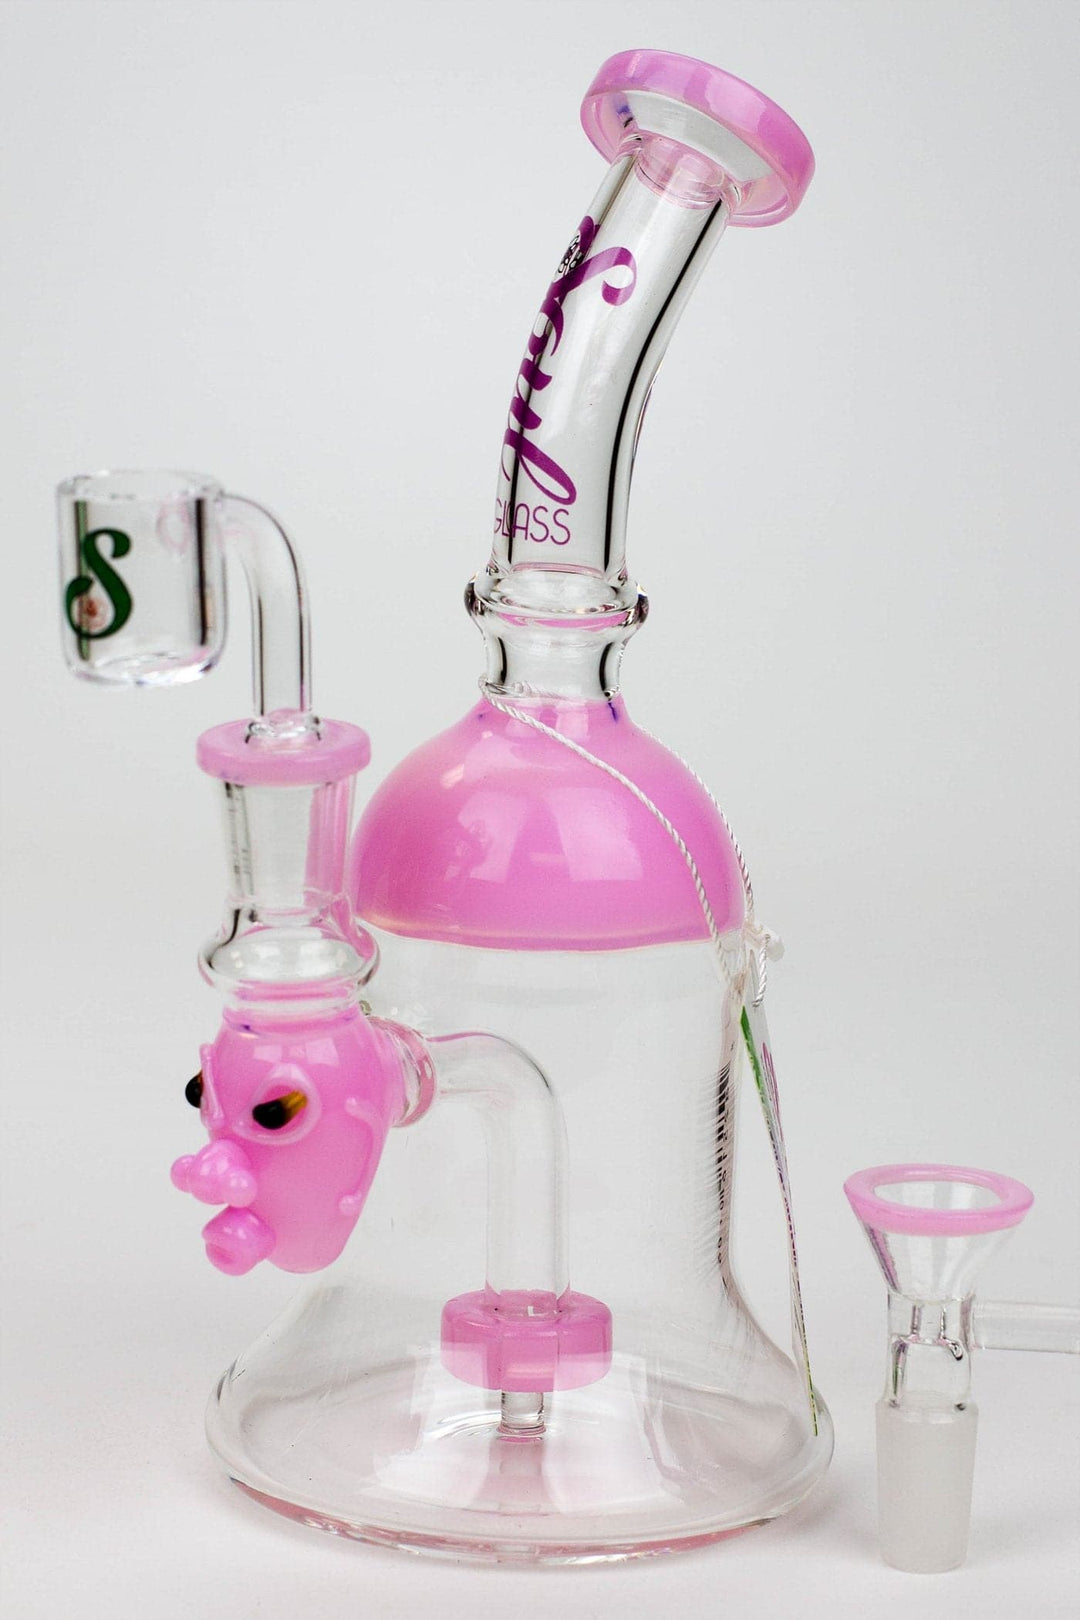 Soul glass 2-in-1 show head diffuser water pipes_7